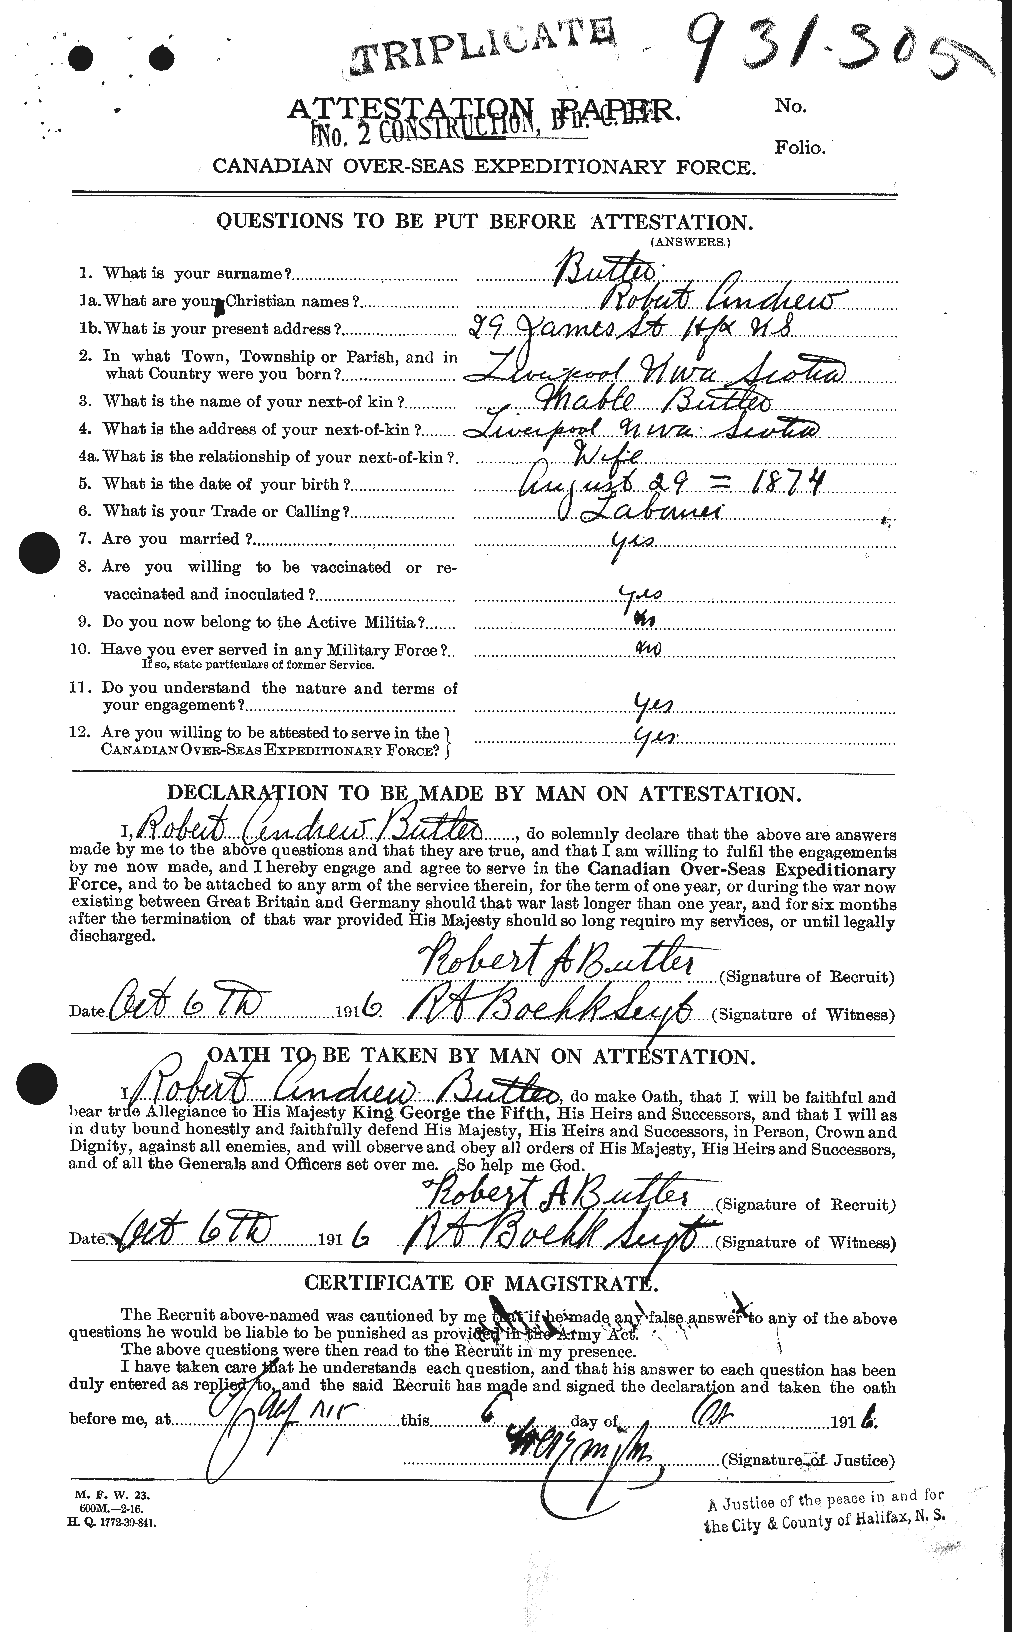 Personnel Records of the First World War - CEF 278221a